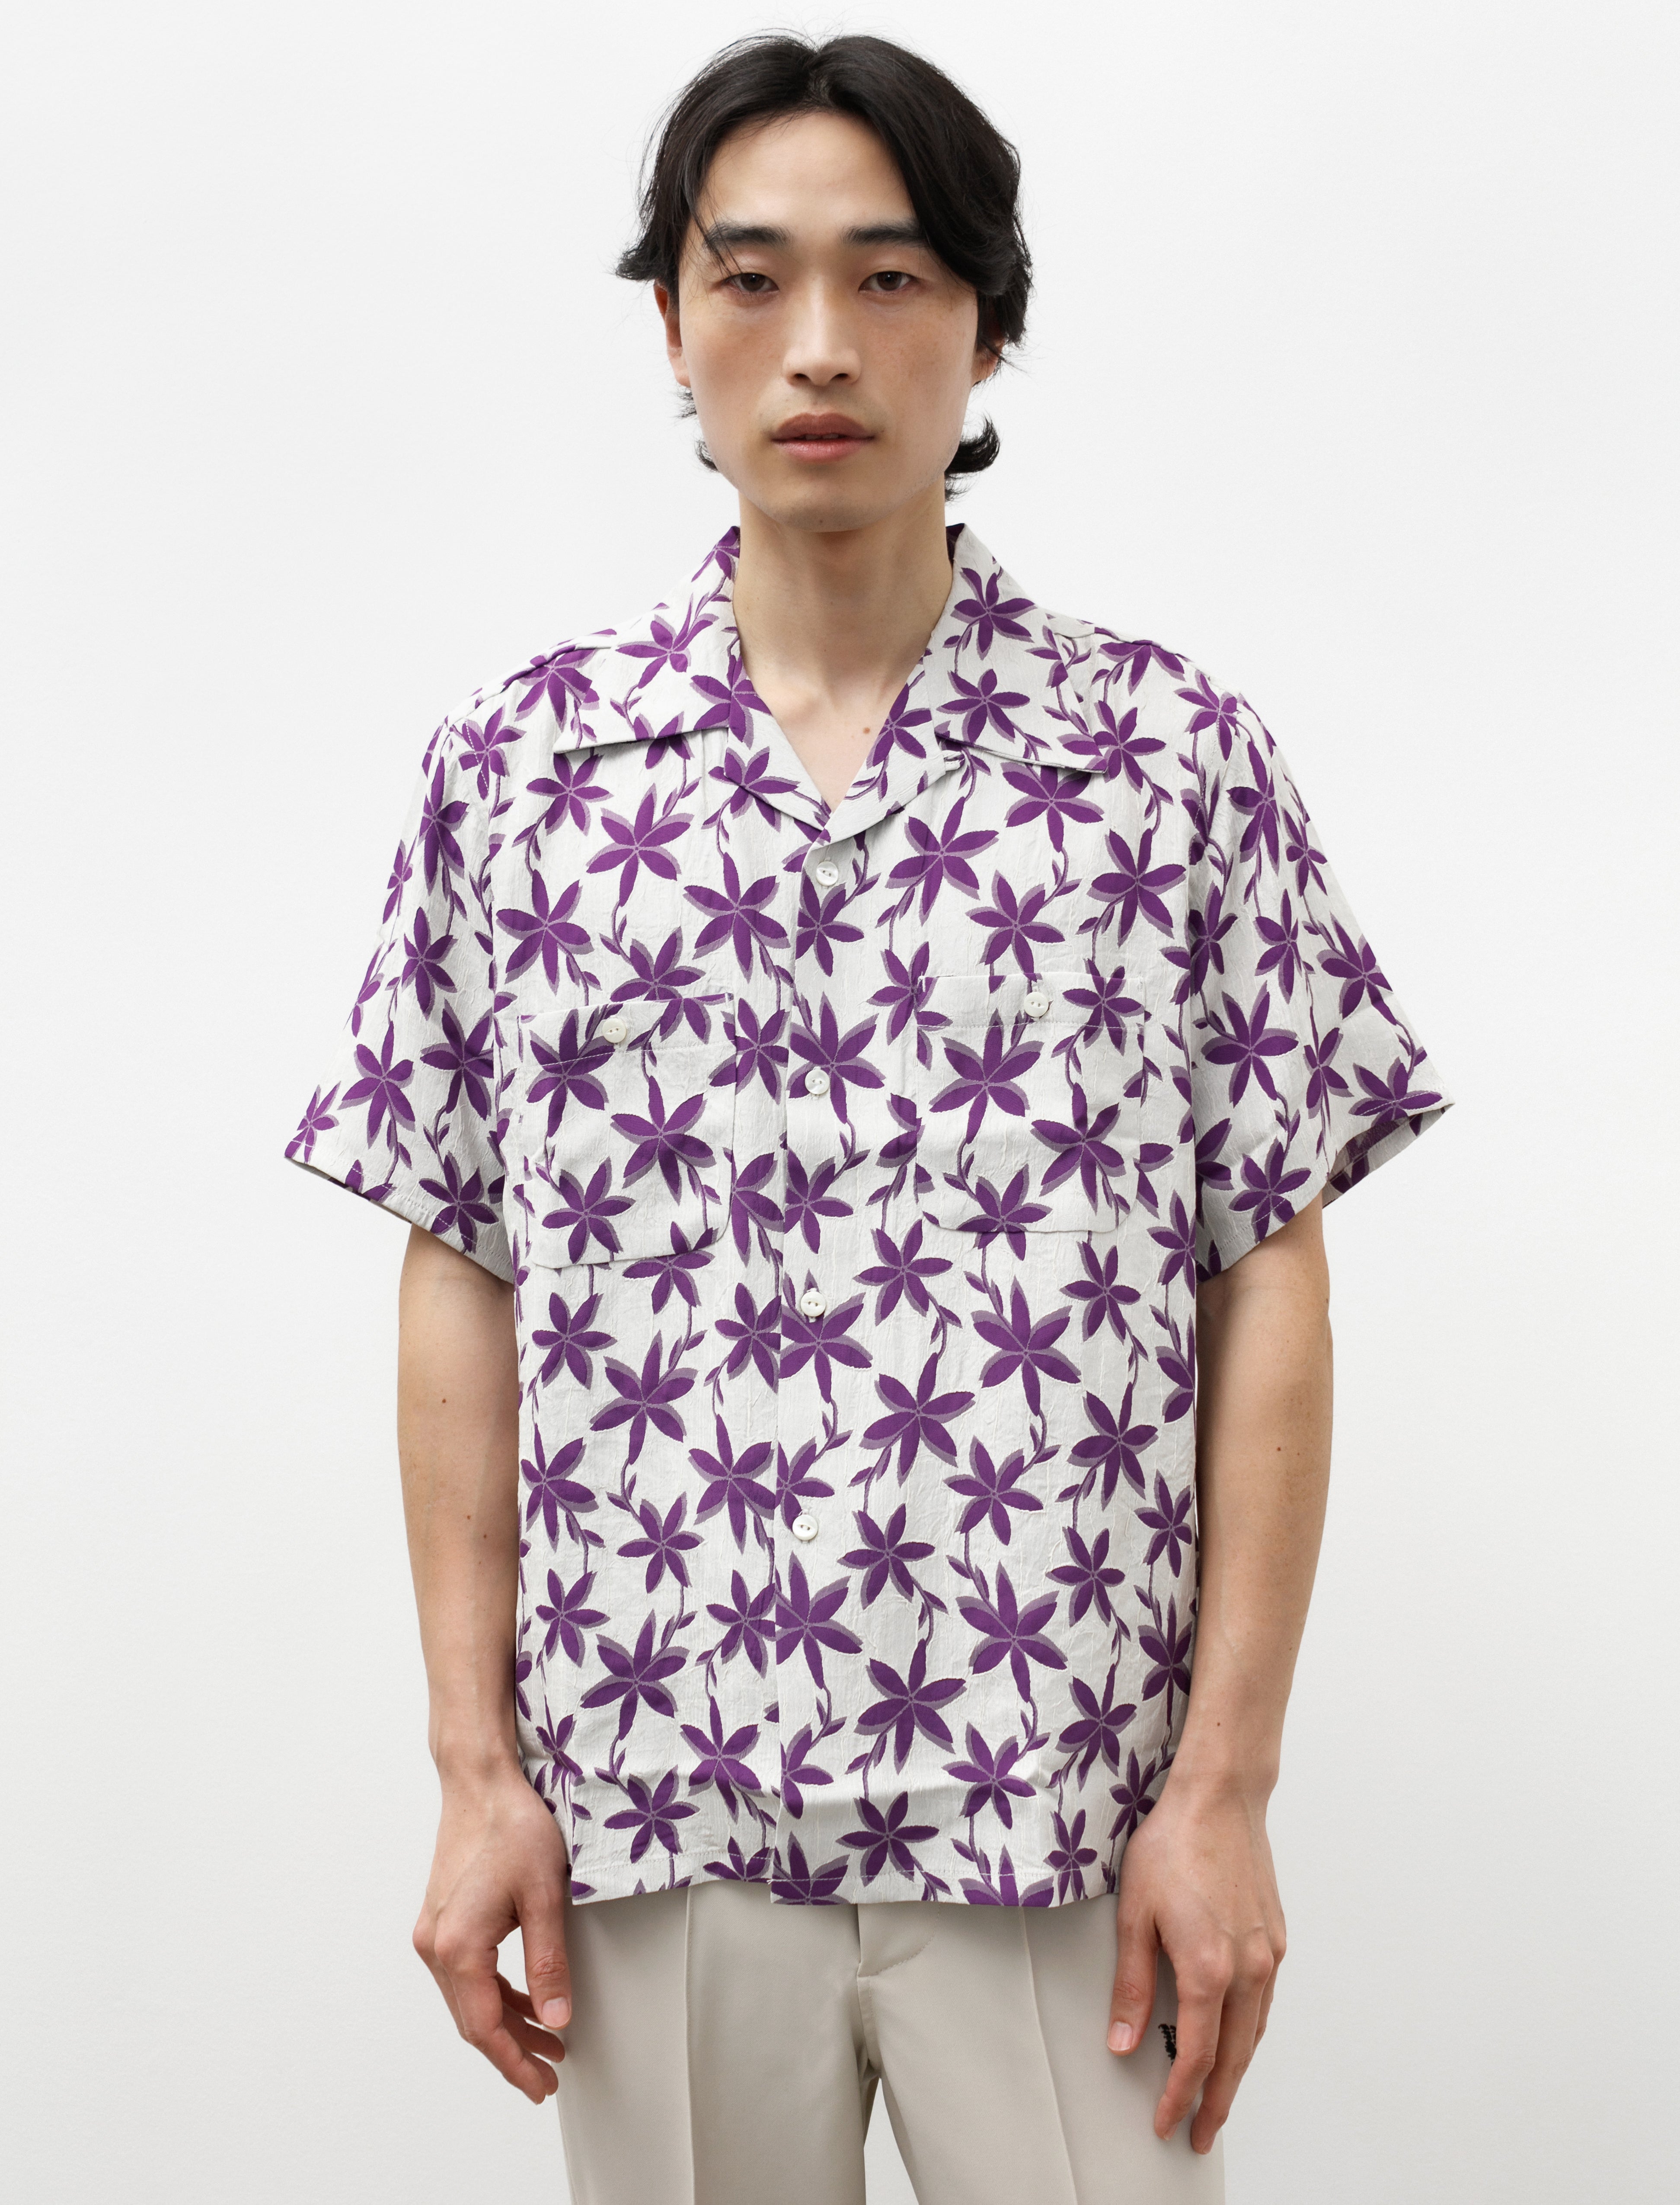 S/S One-Up Shirt Floral Jacquard Off White